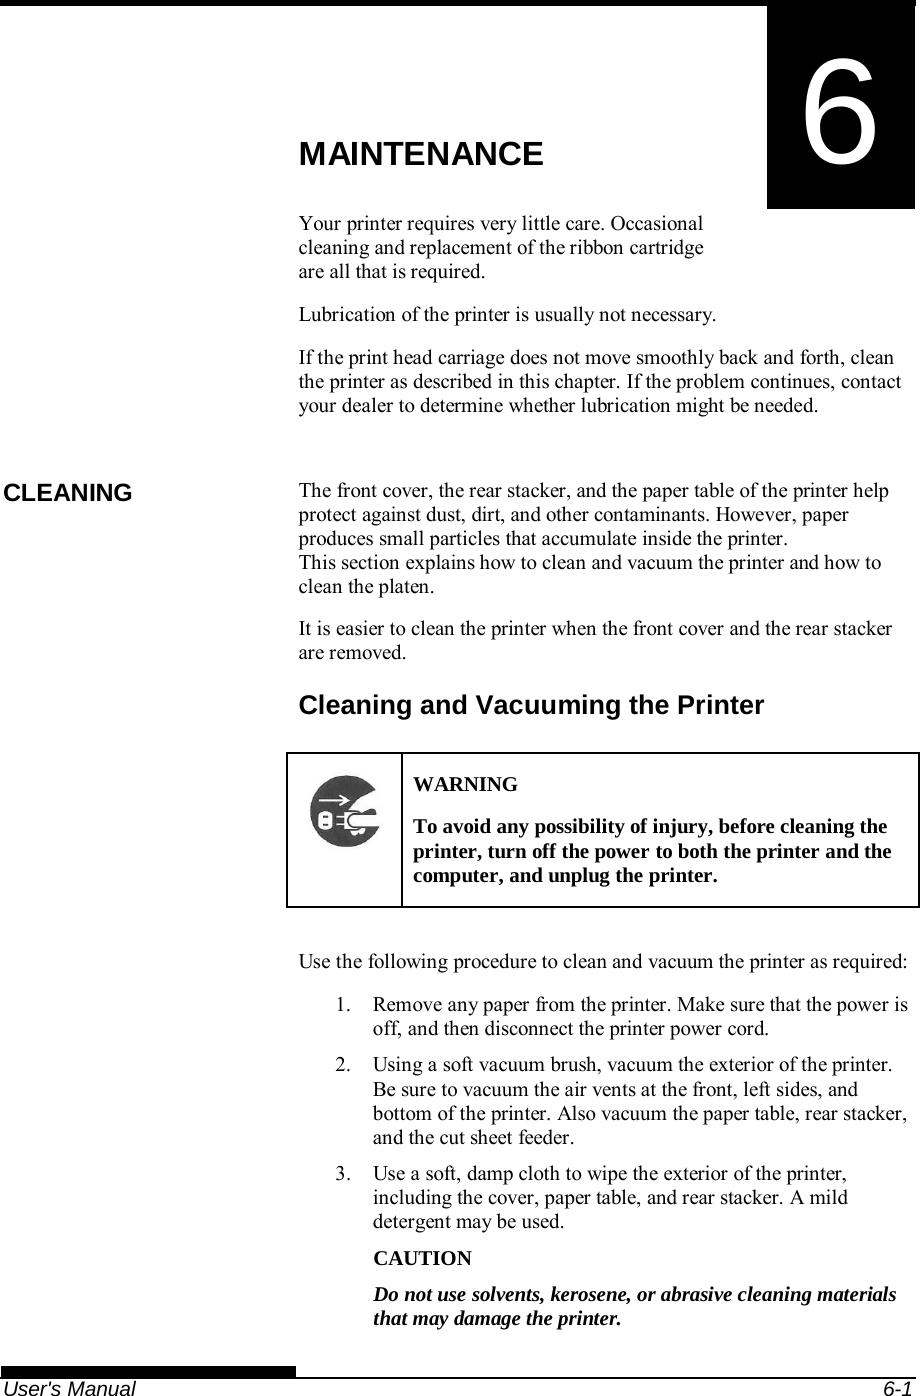   User&apos;s Manual  6-1 6  CHAPTER 6  MAINTENANCE MAINTENANCE Your printer requires very little care. Occasional cleaning and replacement of the ribbon cartridge are all that is required. Lubrication of the printer is usually not necessary. If the print head carriage does not move smoothly back and forth, clean the printer as described in this chapter. If the problem continues, contact your dealer to determine whether lubrication might be needed.  The front cover, the rear stacker, and the paper table of the printer help protect against dust, dirt, and other contaminants. However, paper produces small particles that accumulate inside the printer. This section explains how to clean and vacuum the printer and how to clean the platen. It is easier to clean the printer when the front cover and the rear stacker are removed. Cleaning and Vacuuming the Printer  WARNING To avoid any possibility of injury, before cleaning the printer, turn off the power to both the printer and the computer, and unplug the printer.  Use the following procedure to clean and vacuum the printer as required: 1.  Remove any paper from the printer. Make sure that the power is off, and then disconnect the printer power cord. 2.  Using a soft vacuum brush, vacuum the exterior of the printer. Be sure to vacuum the air vents at the front, left sides, and bottom of the printer. Also vacuum the paper table, rear stacker, and the cut sheet feeder. 3.  Use a soft, damp cloth to wipe the exterior of the printer, including the cover, paper table, and rear stacker. A mild detergent may be used. CAUTION Do not use solvents, kerosene, or abrasive cleaning materials that may damage the printer. CLEANING 